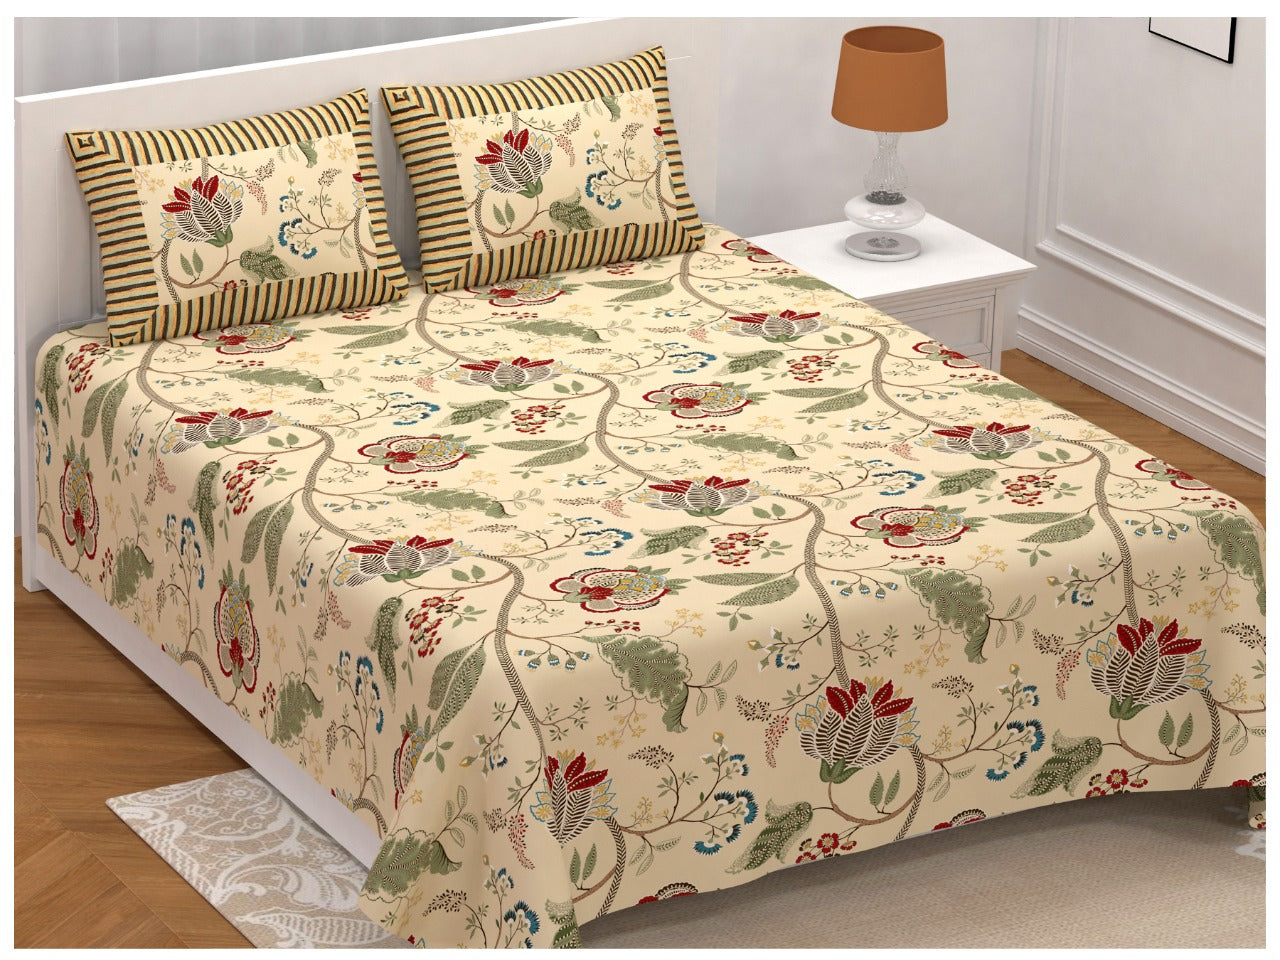 100% Pure Cotton King Size Double Bedsheet With 2 Pillow Covers ( 100 X 108 Inches ) - JBNBK50